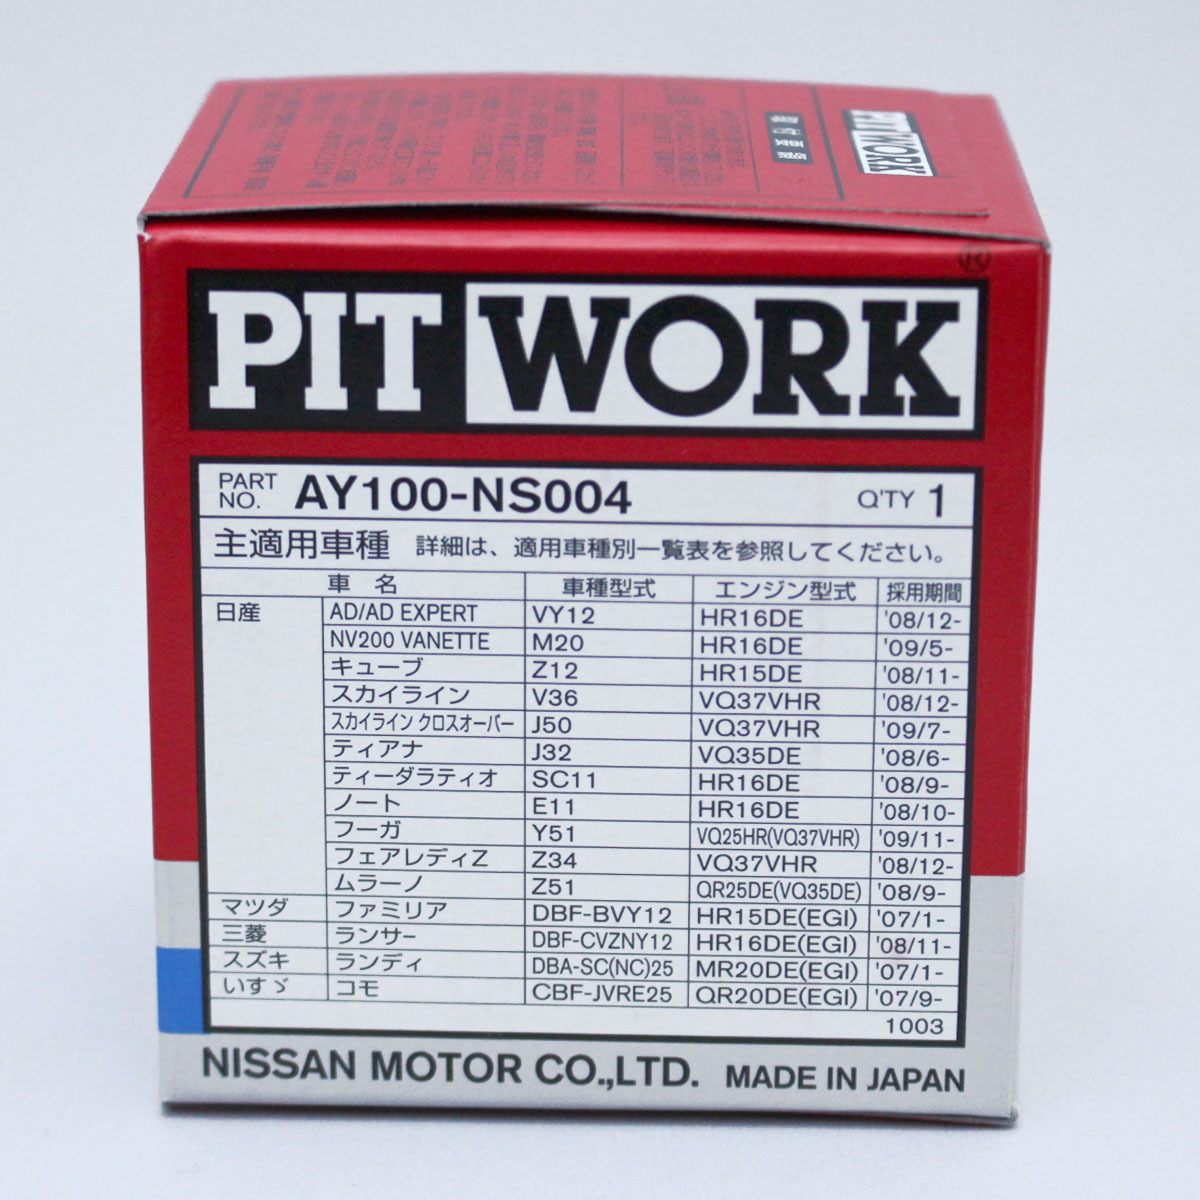 ff#10 piece set AY100-NS004pito Work PITWORK oil filter oil element ( Okinawa prefecture Area is delivery un- possible )